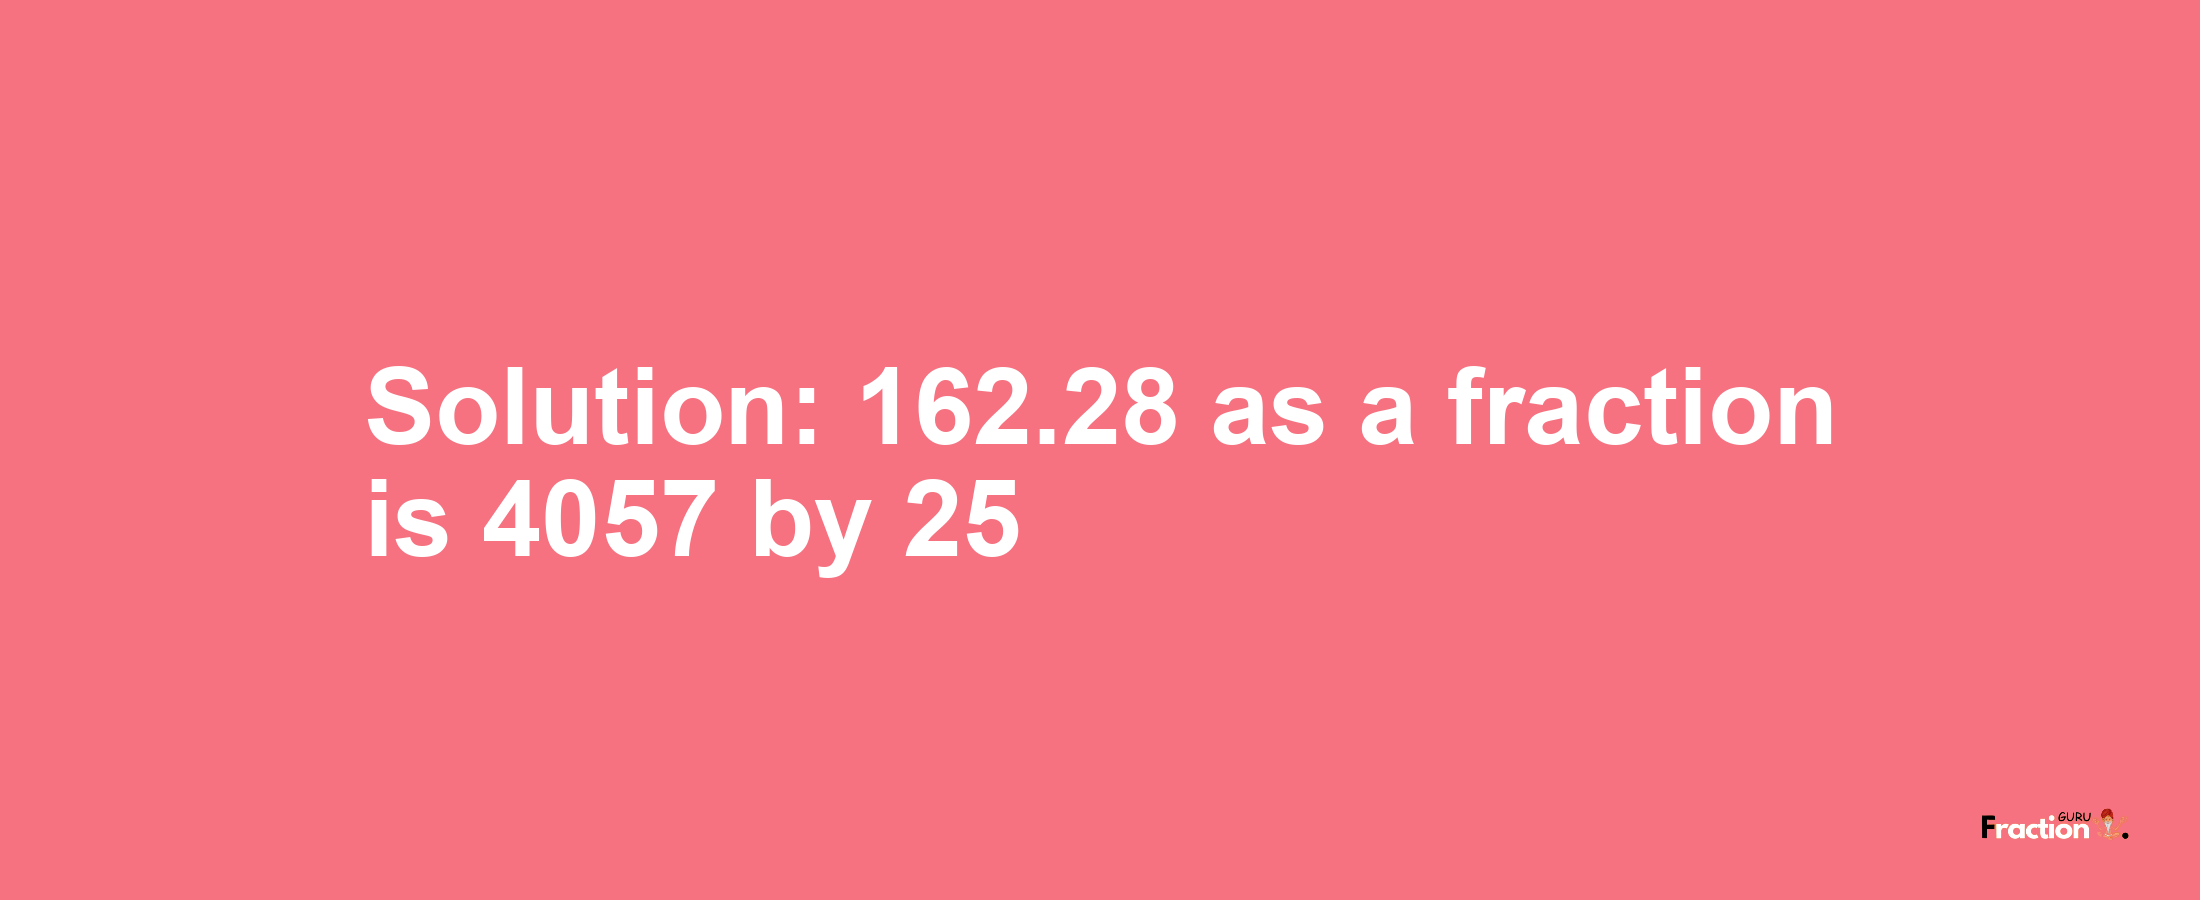 Solution:162.28 as a fraction is 4057/25